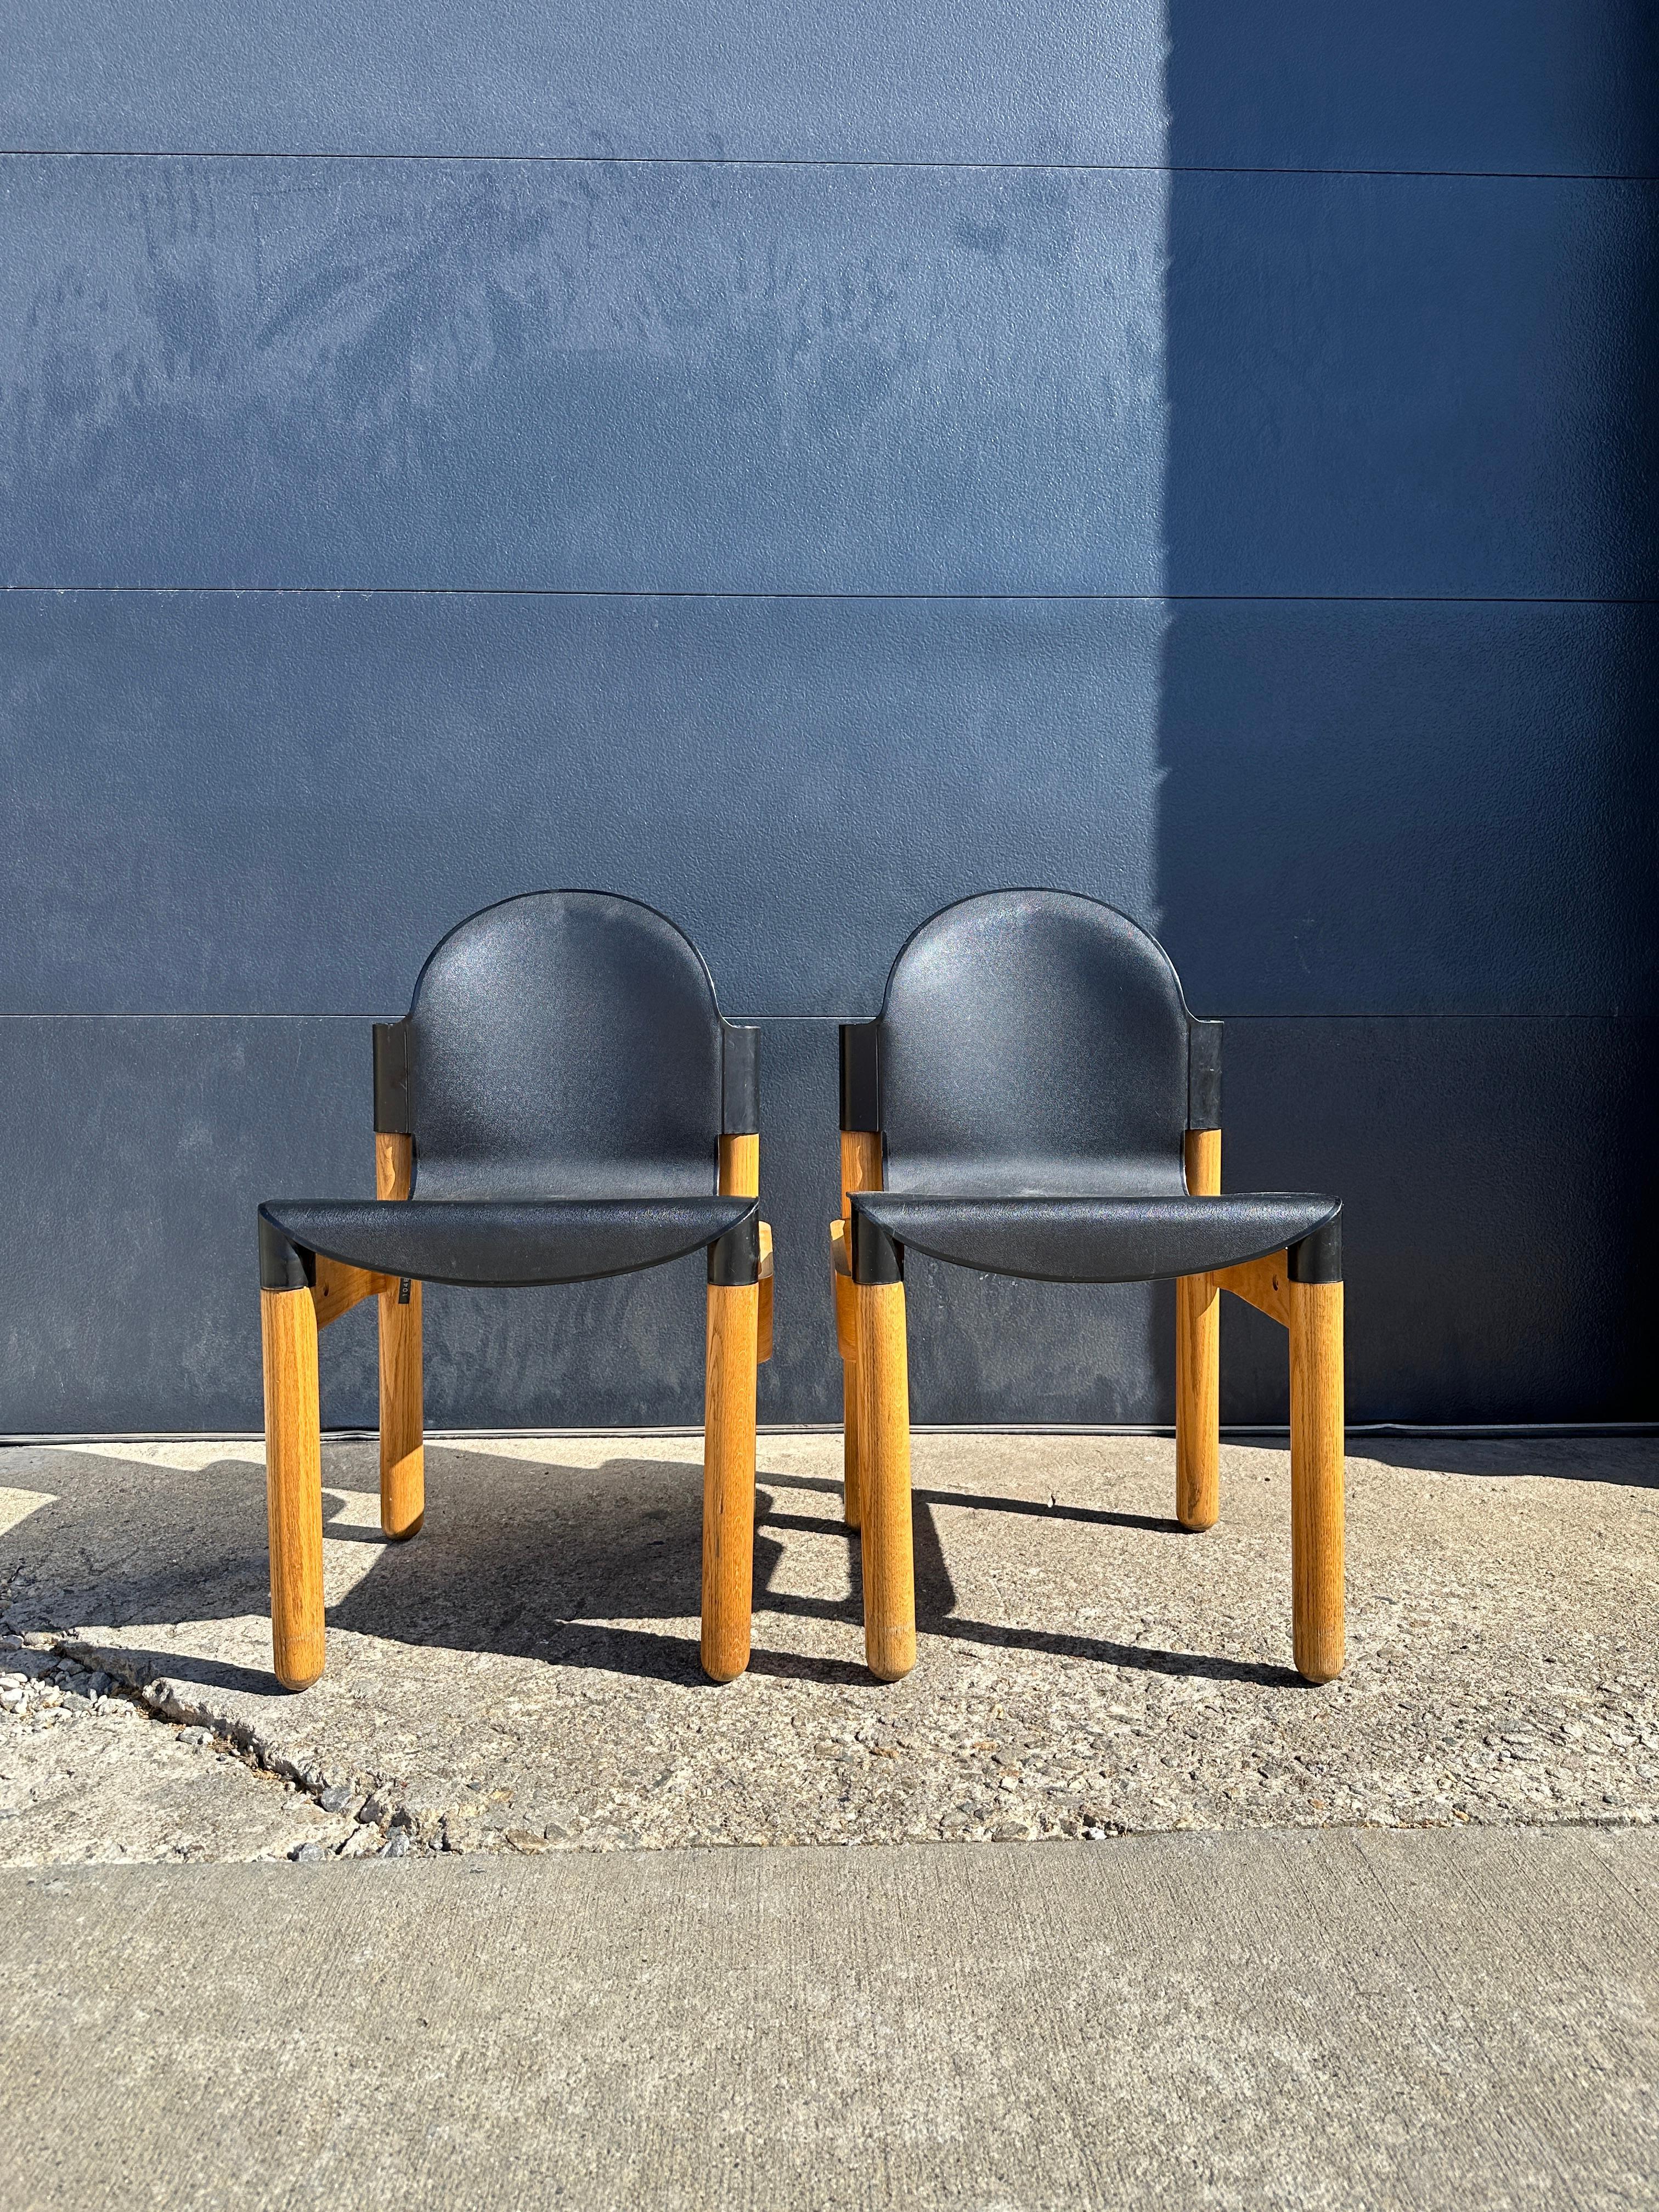 Pair of midcentury Chair Flex designed by Gerd Lange for Thonet in Germany, circa 1970s.

Marked. Stackable. Practical

Sold as a set

18.3”W x 16”D x 31.1”H x 16”SH.